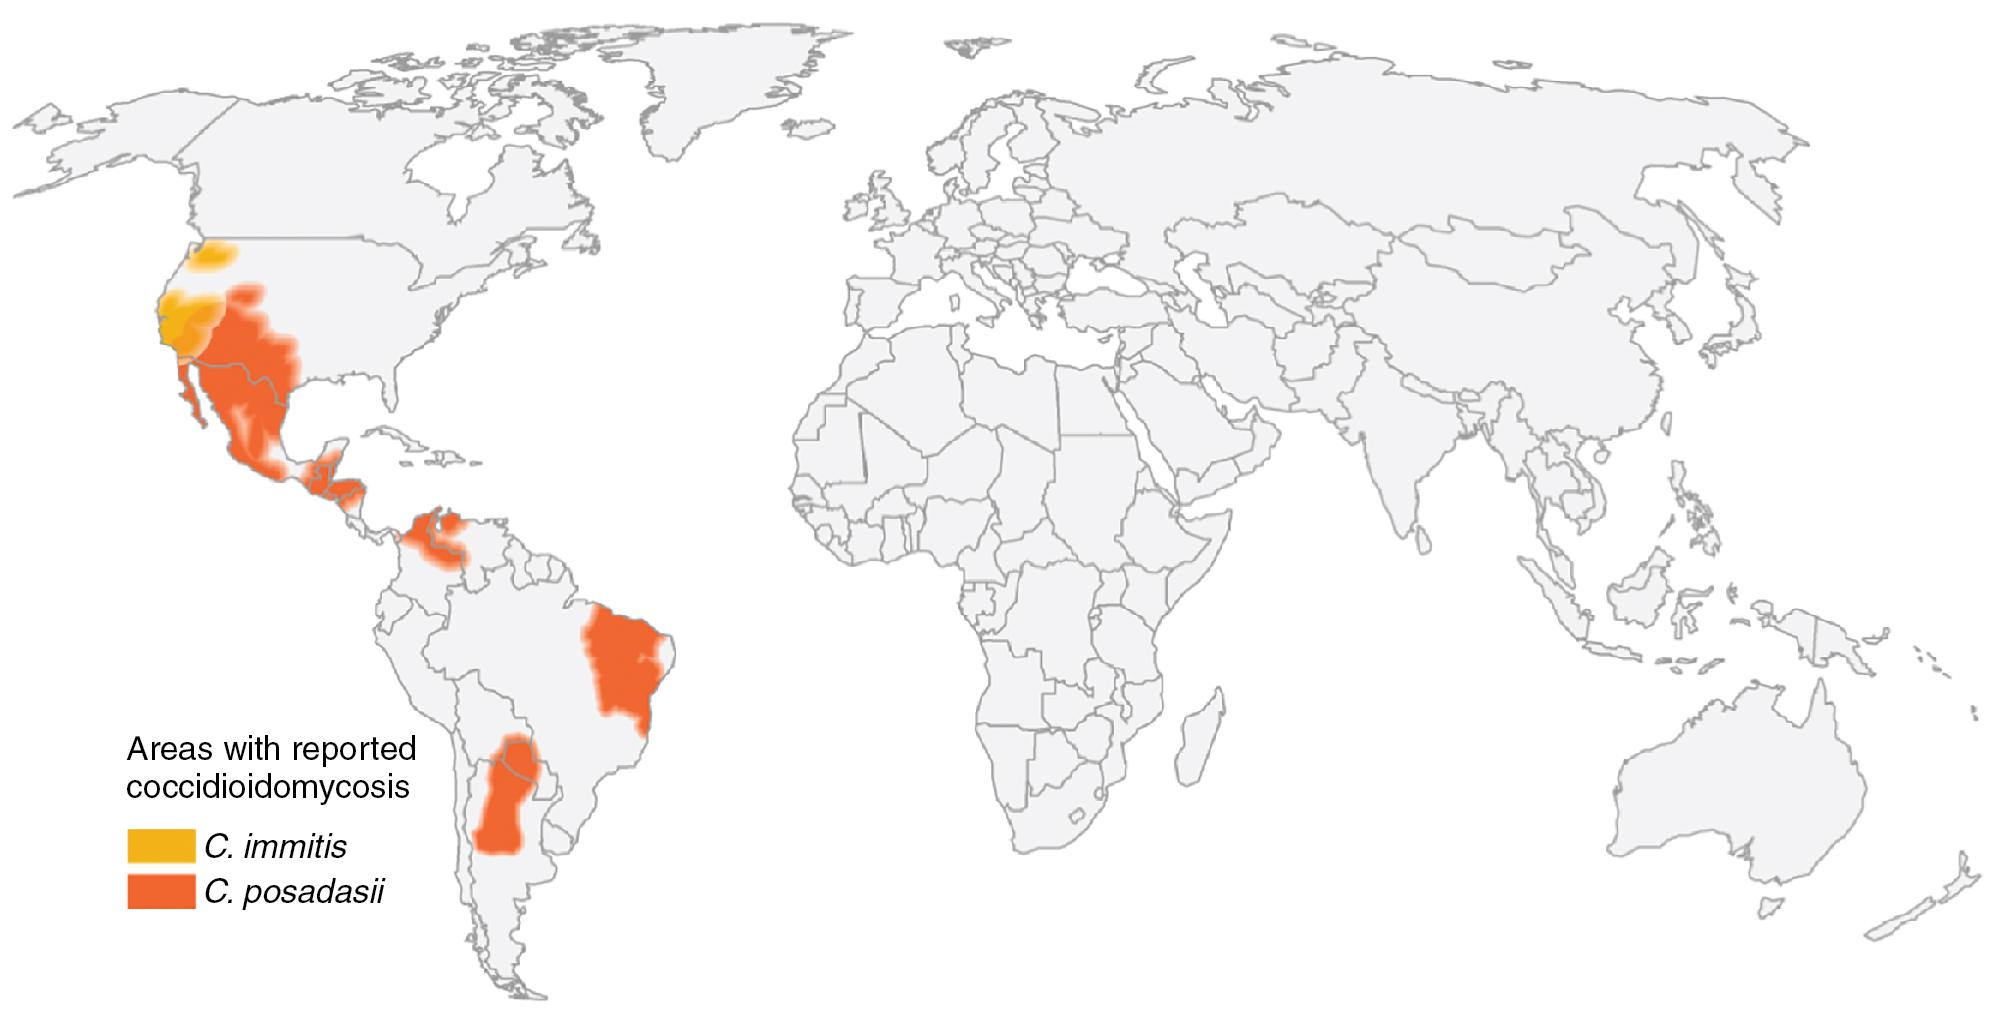 FIGURE 87.5, Geographic distribution of coccidioidomycosis in Latin America and the United States.